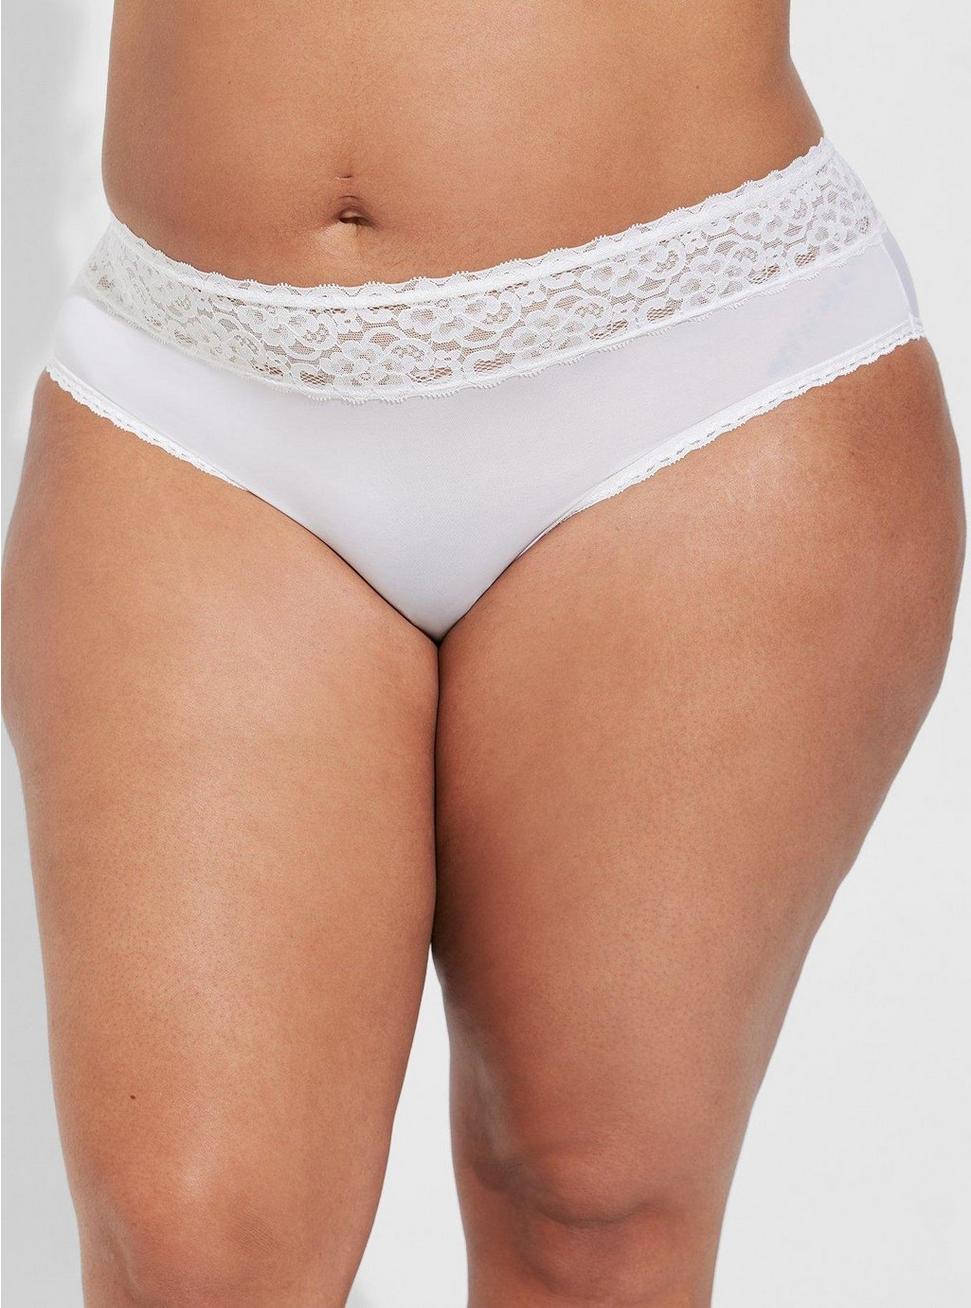 Second Skin Mid-Rise Hipster Lace Trim Panty, CLOUD DANCER, alternate